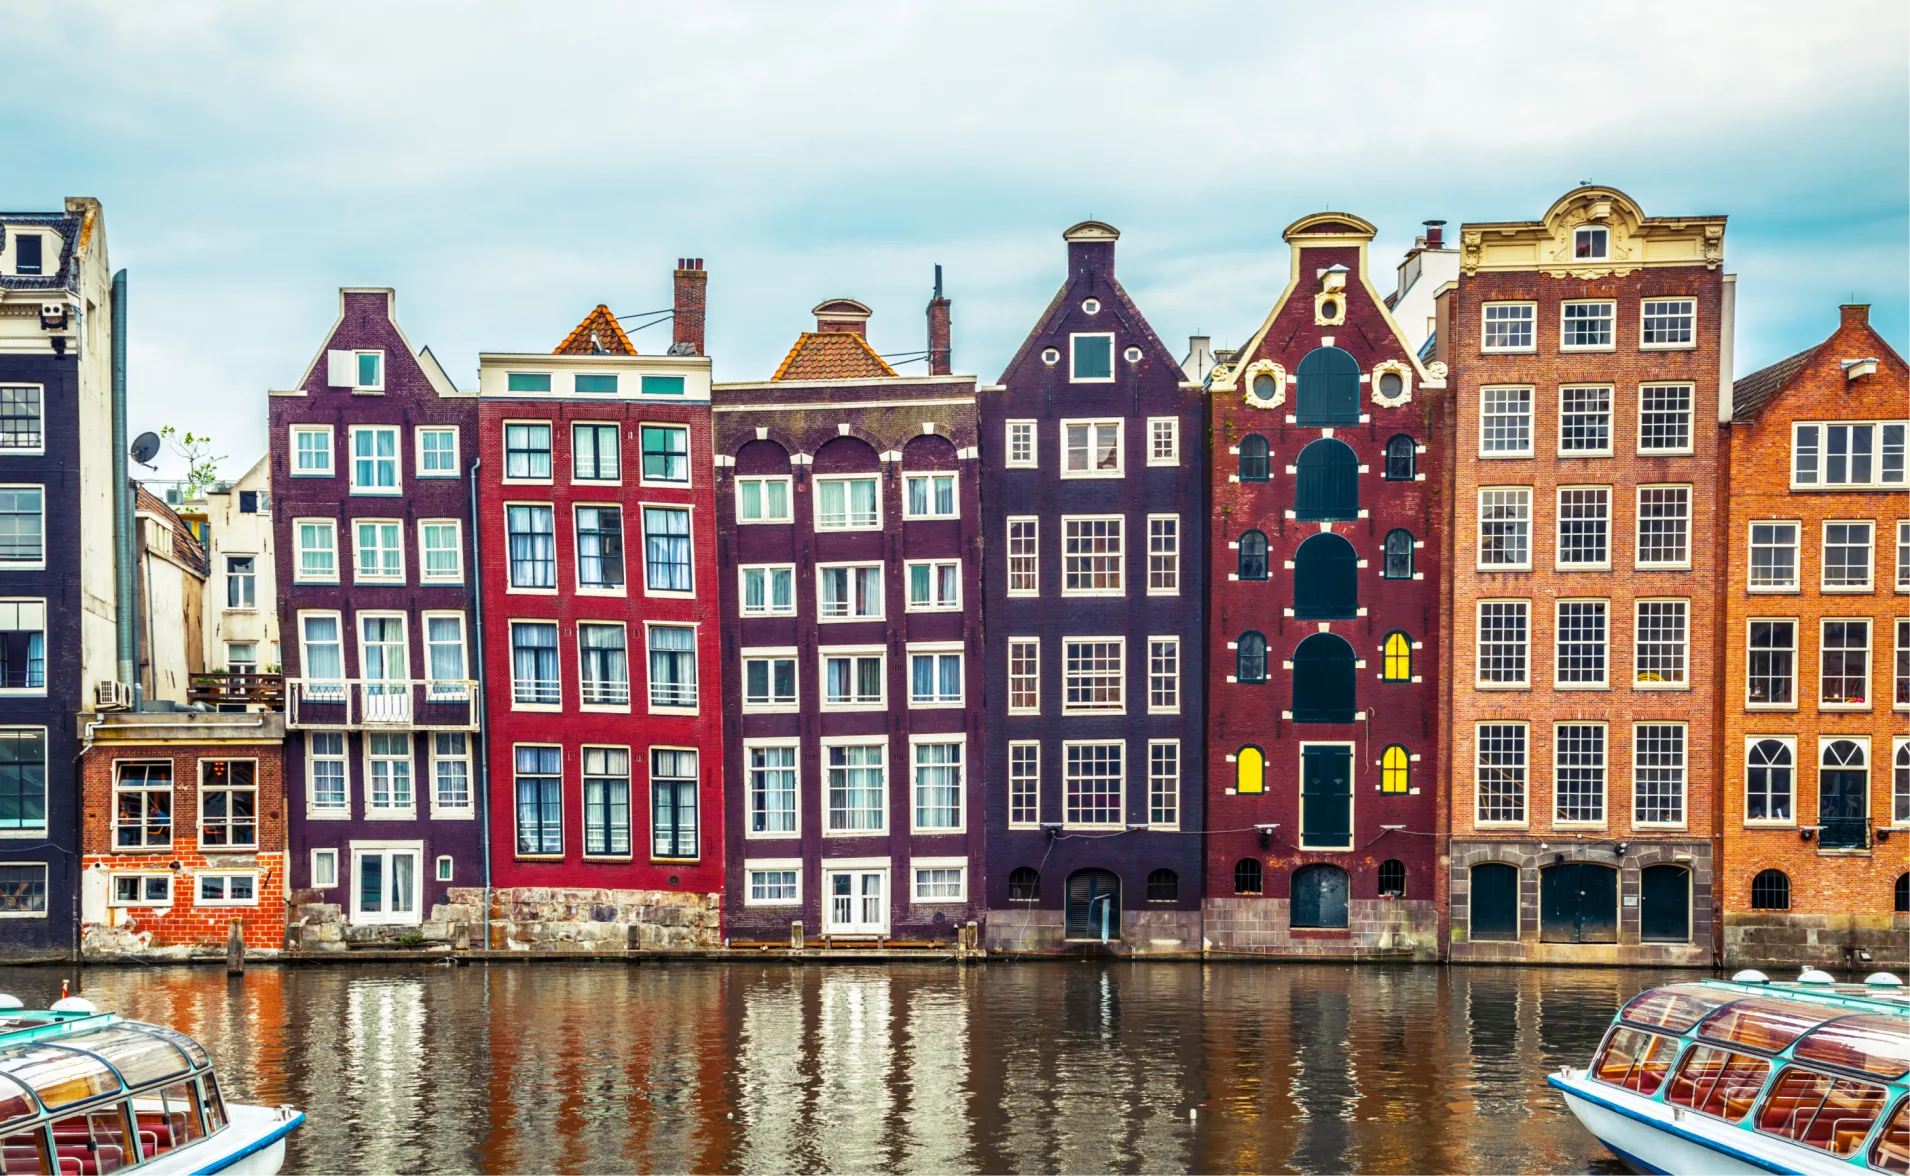 A Row of Colorful Gable Houses by a Canal